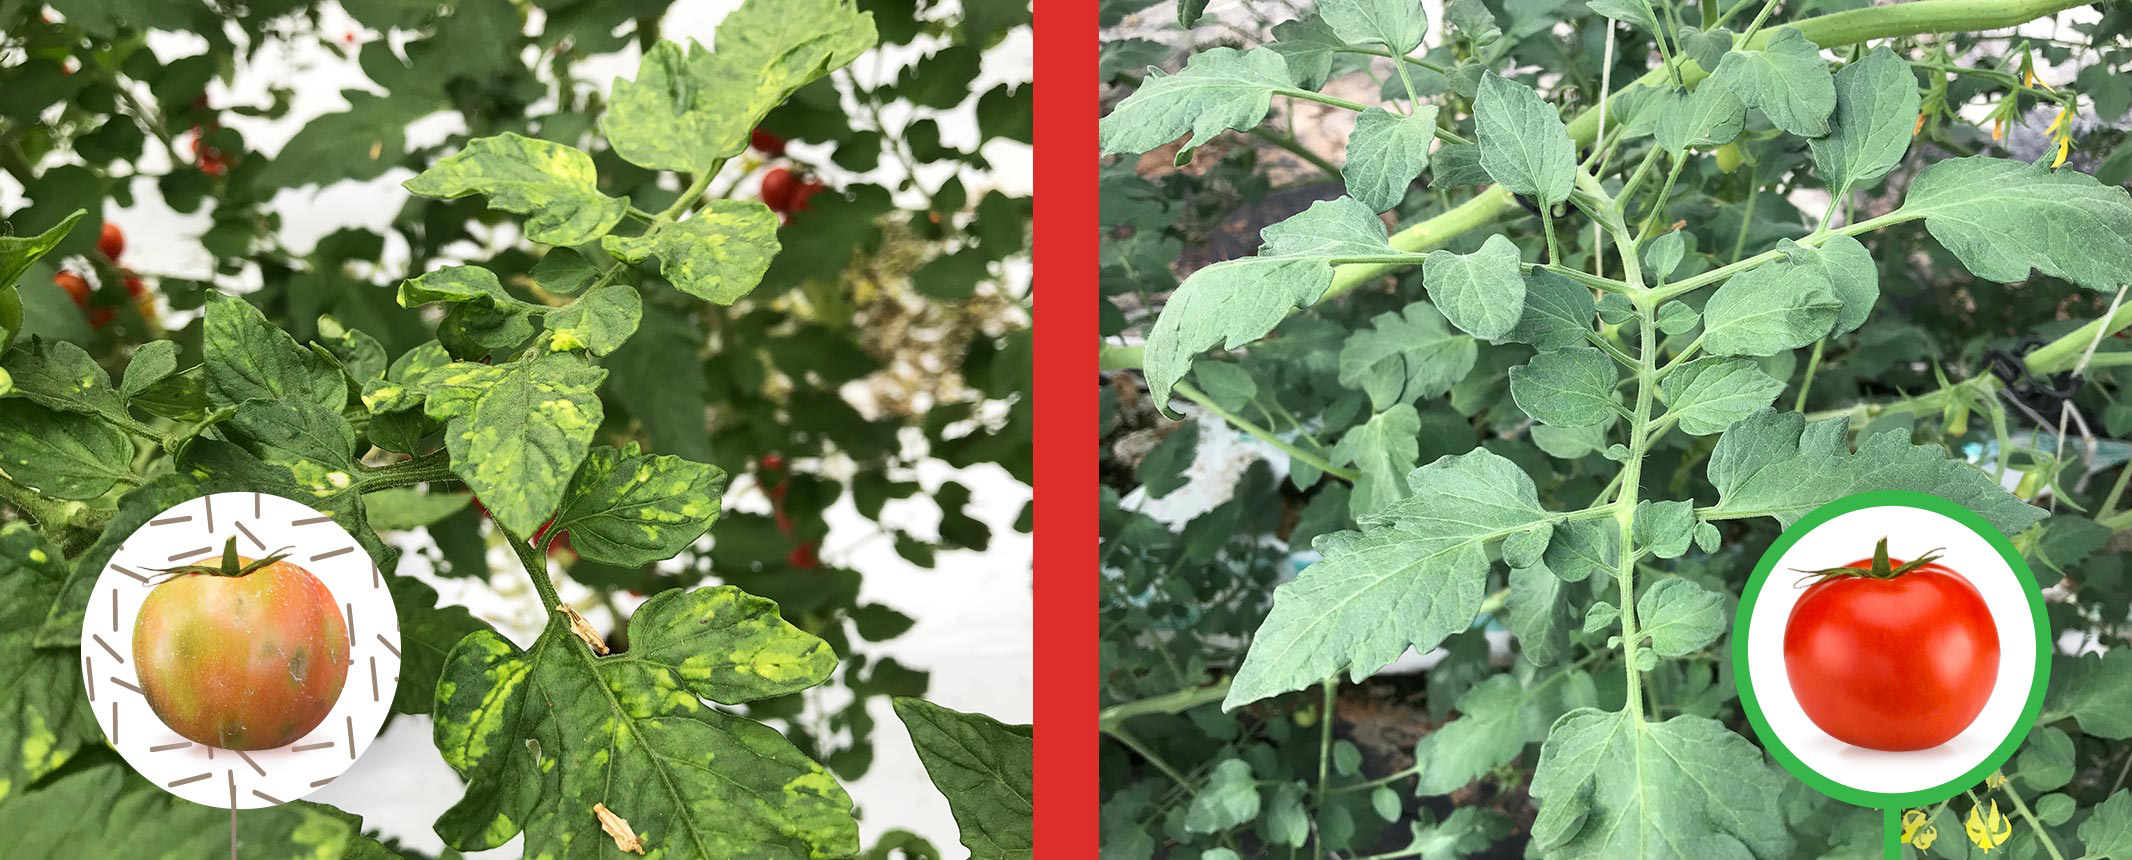 Left: tomato,plants infected with toBRFV - Right: HR resistant tomato planttomato